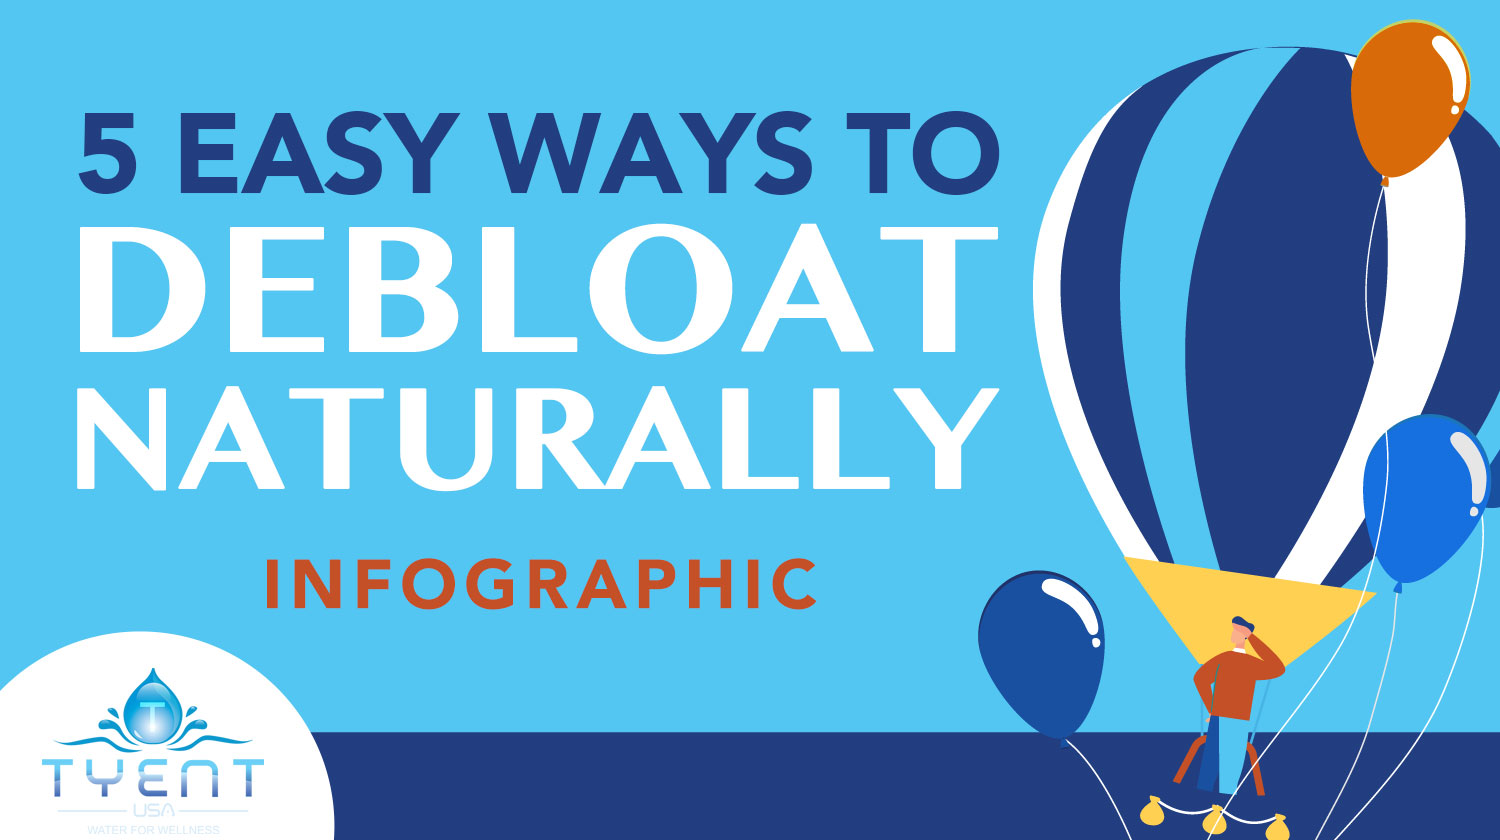 How To Debloat For Spring In 5 Quick And Easy Ways [INFOGRAPHIC]